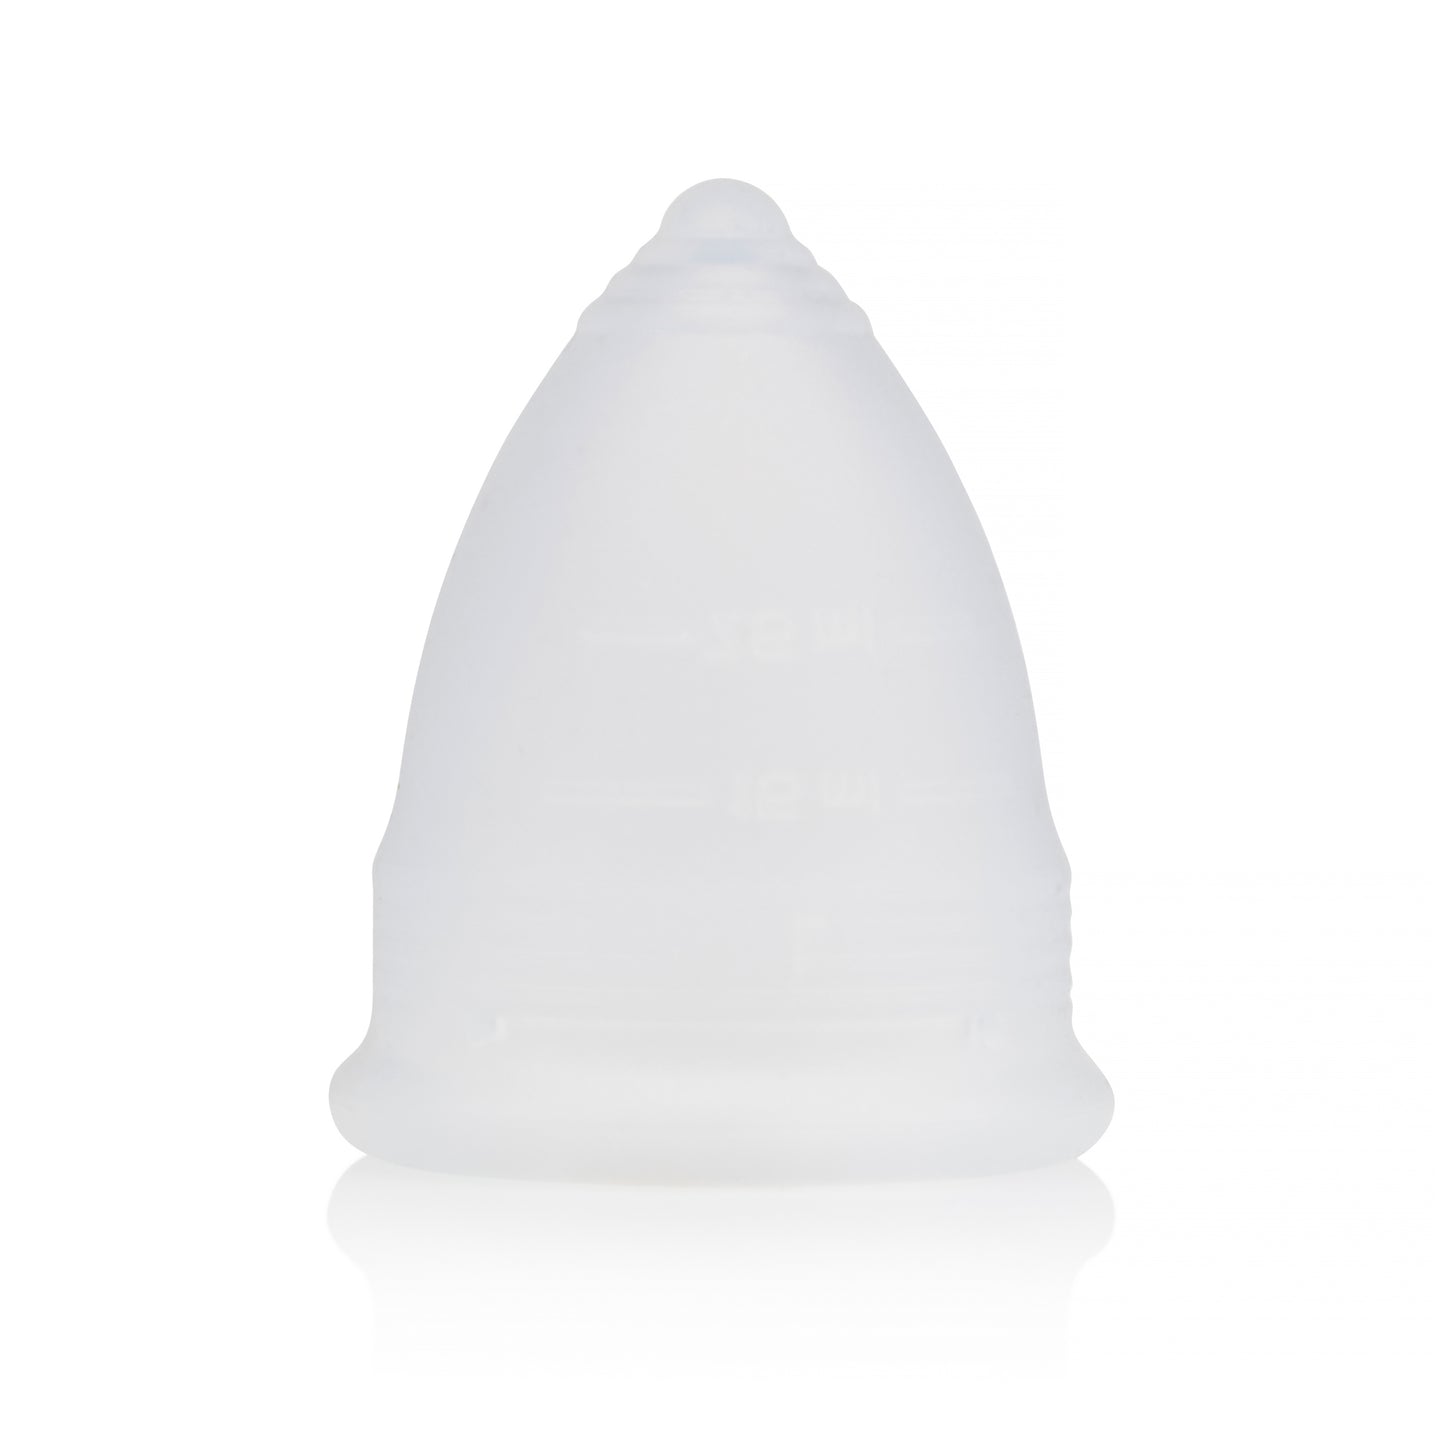 Funmicup No-stem Anatomic Menstrual Cup - Large product on white background